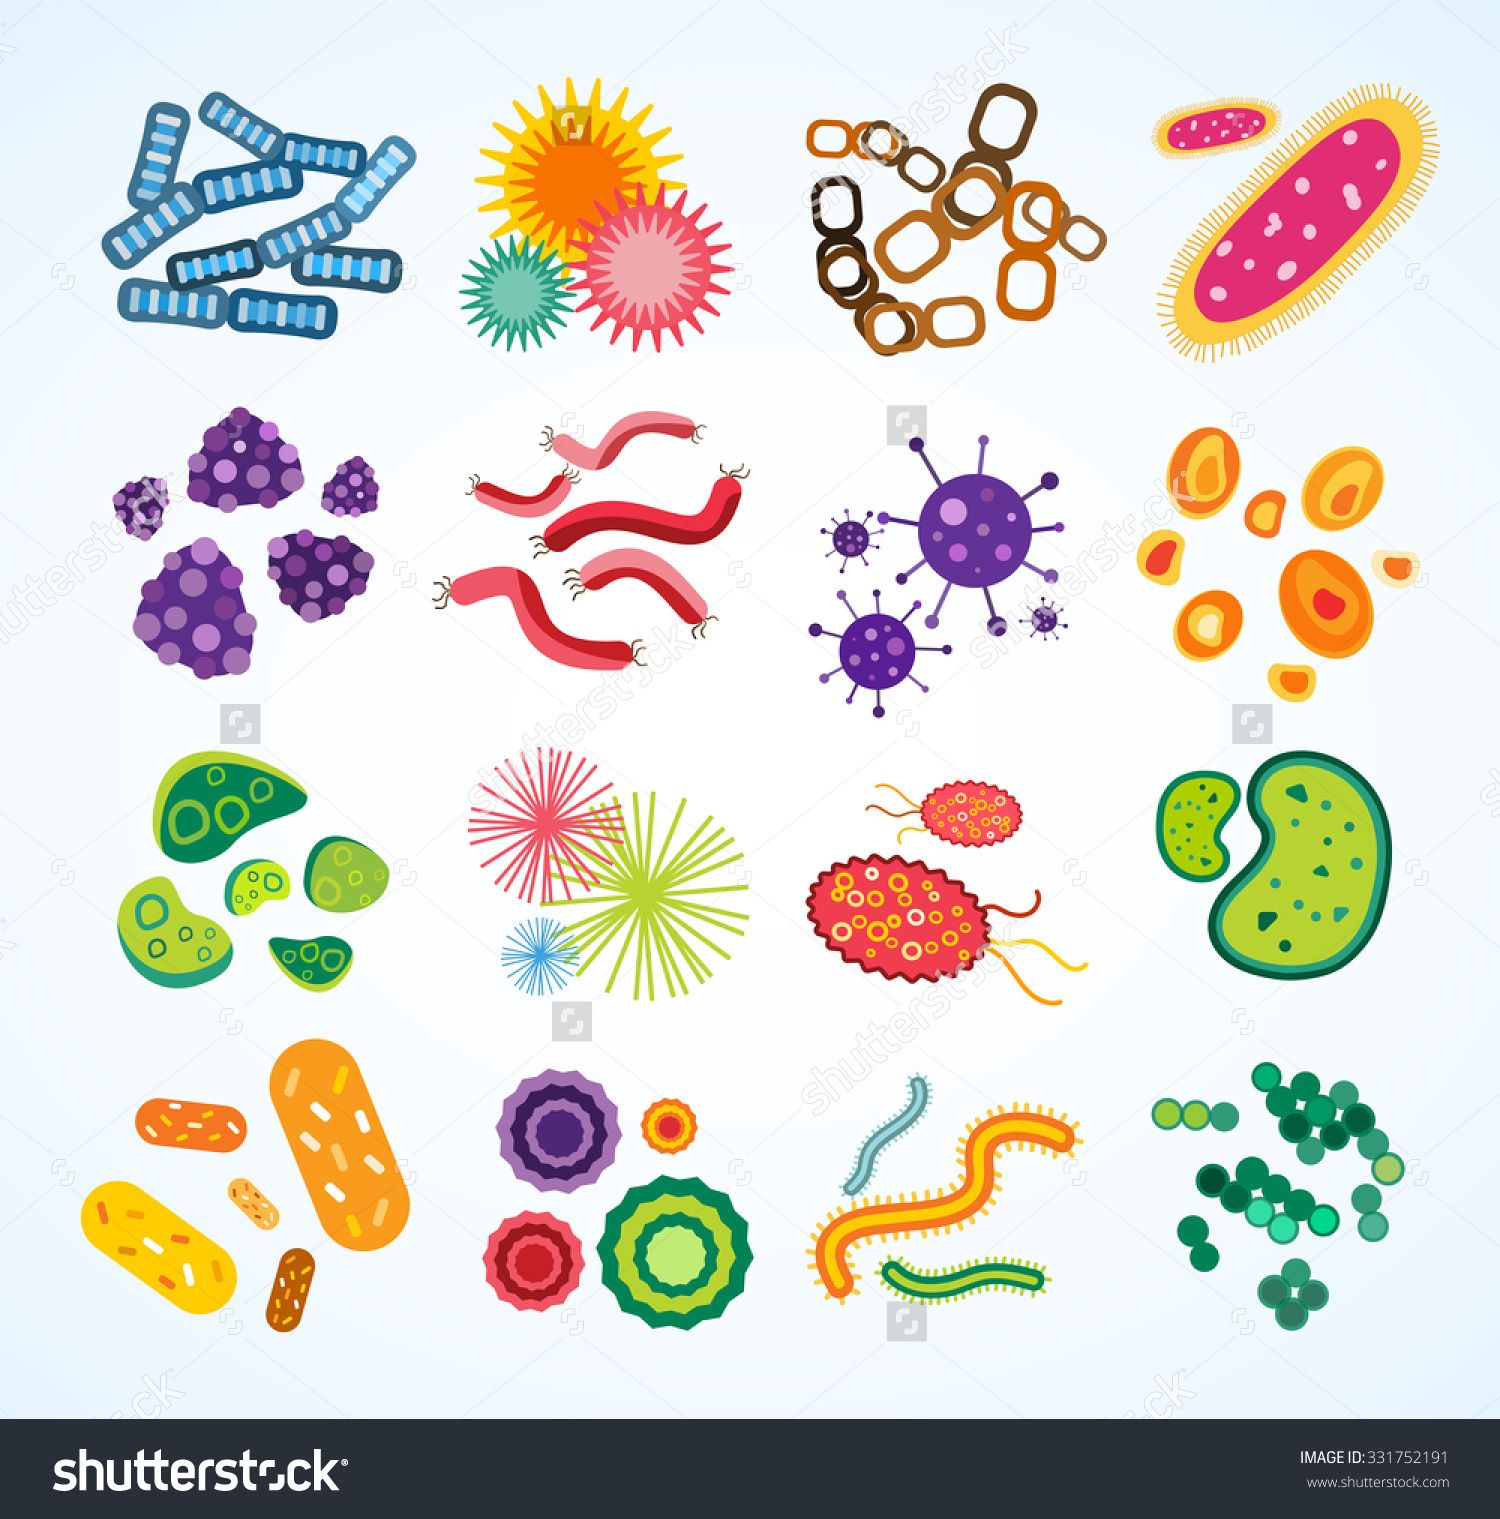 Germs clipart microscopic organism. Pin by glaze on